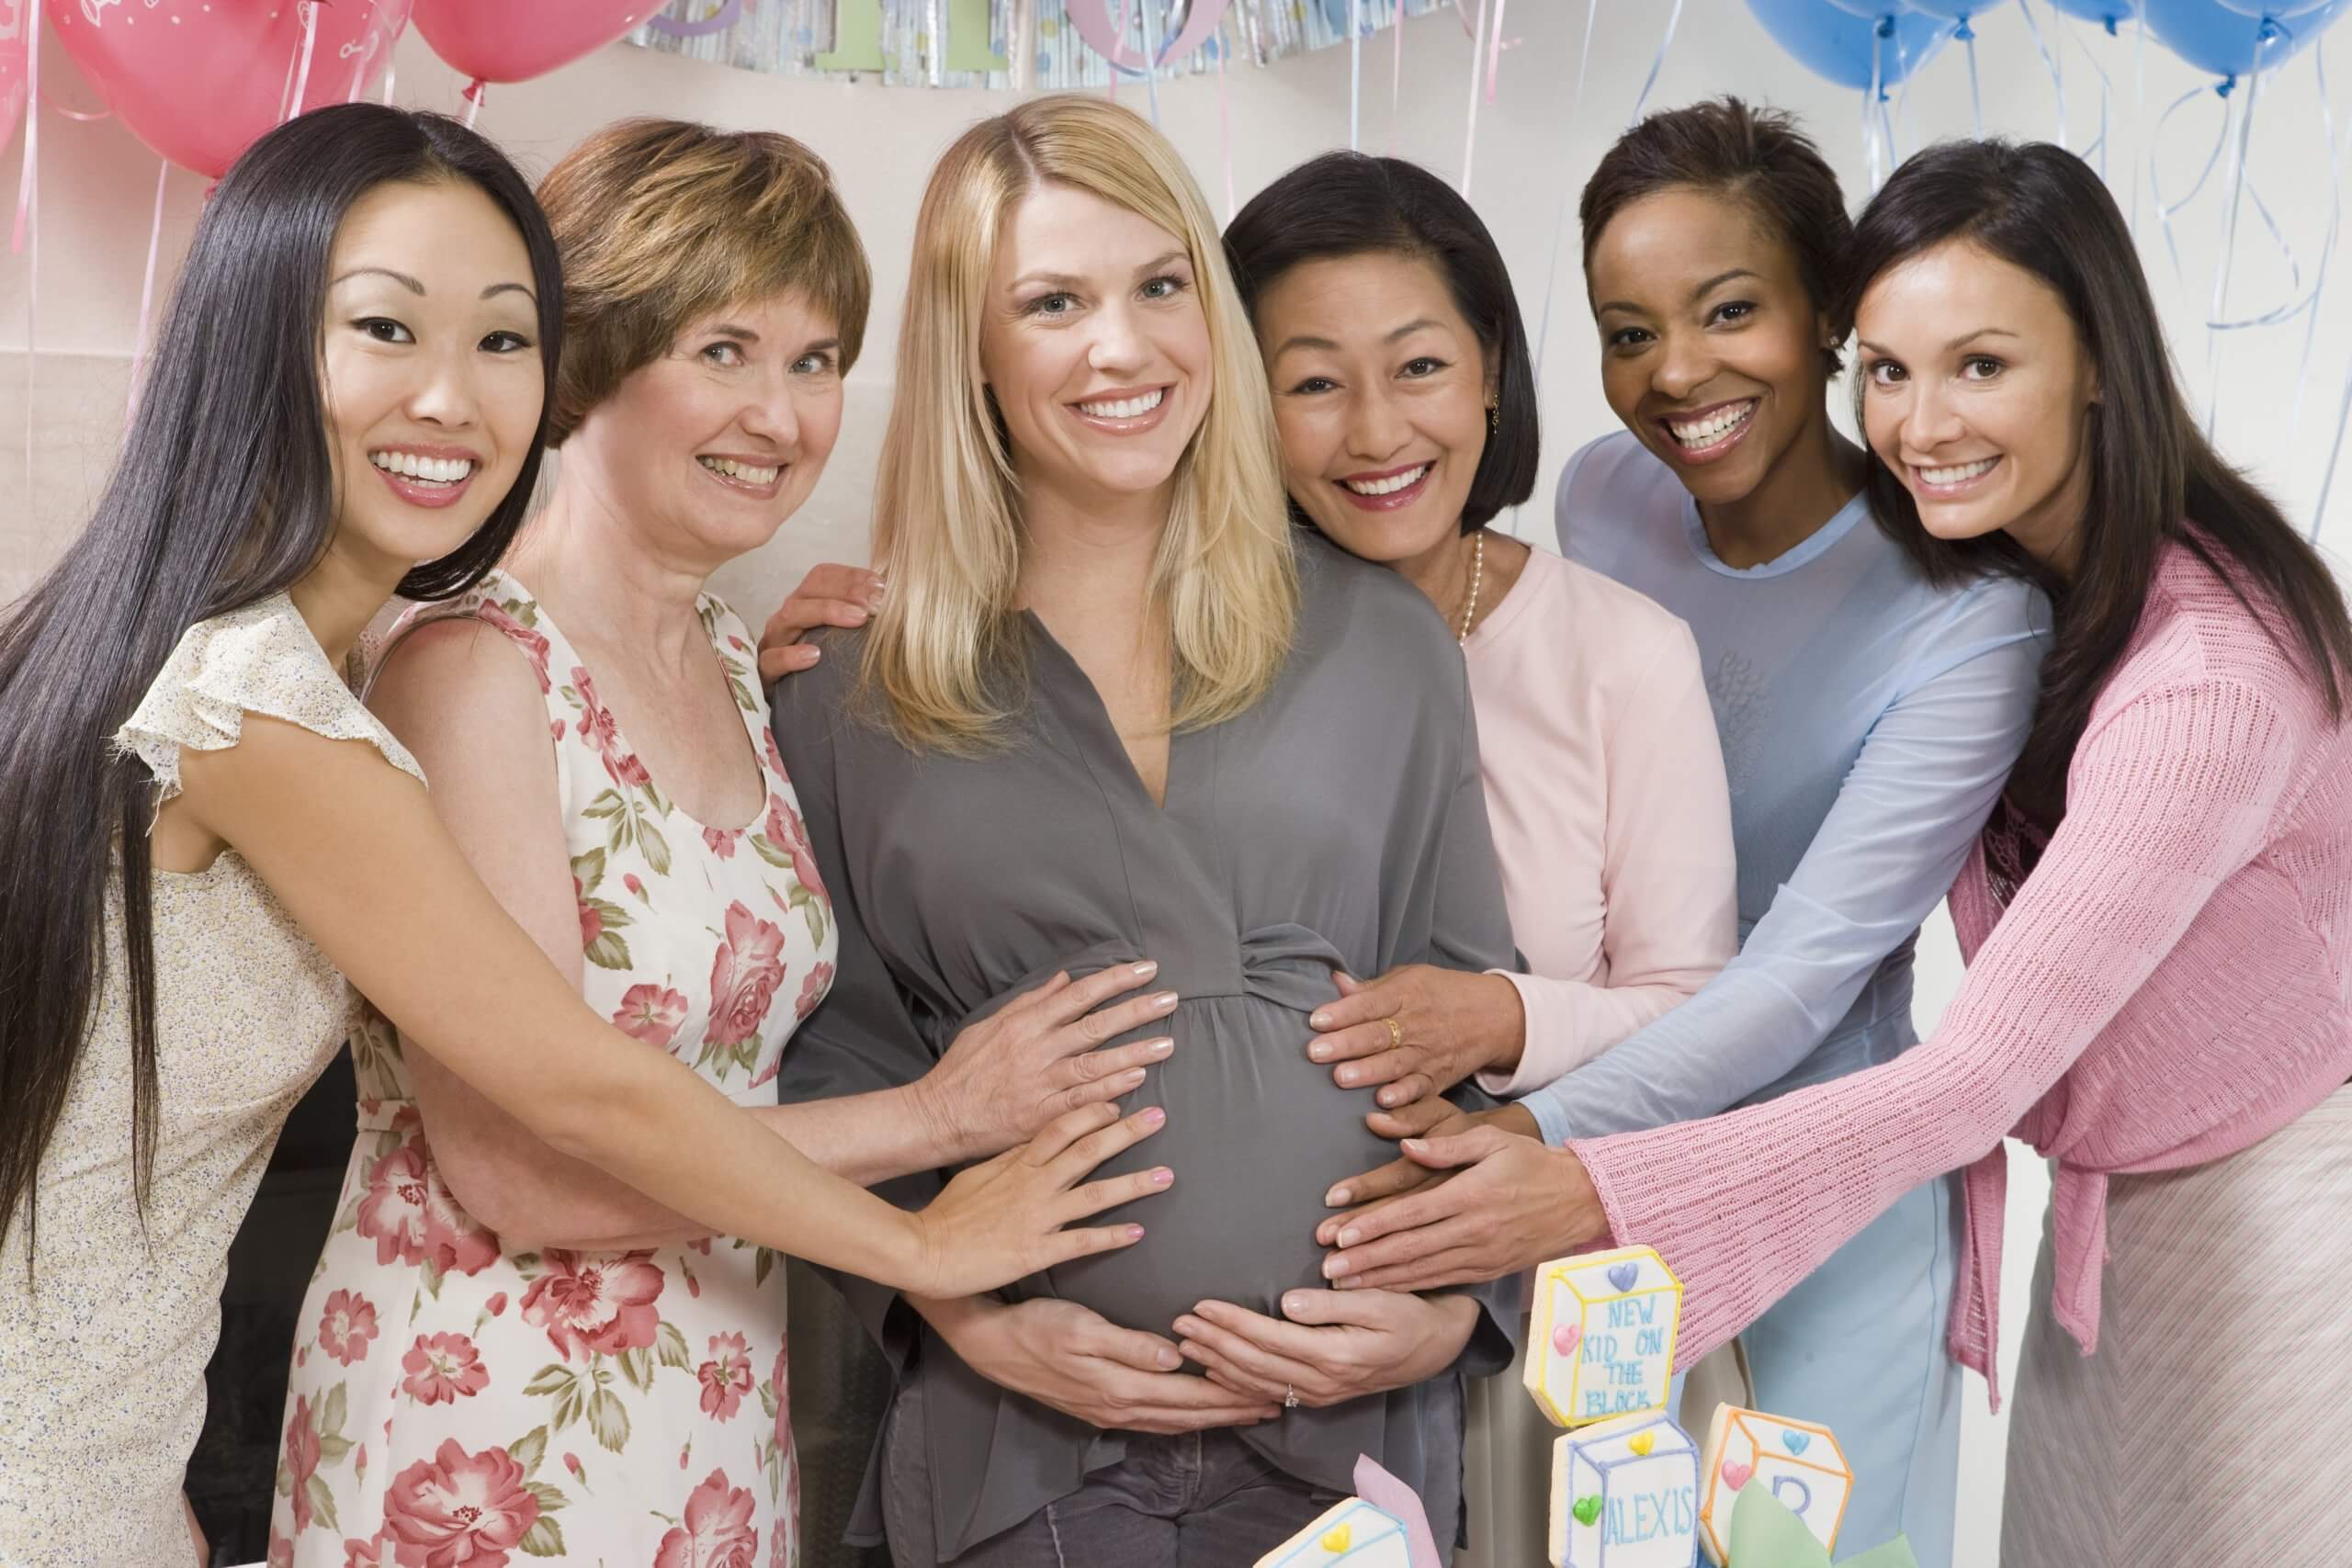 Step-By-Step Guide to Planning Your Best Friend’s Baby Shower